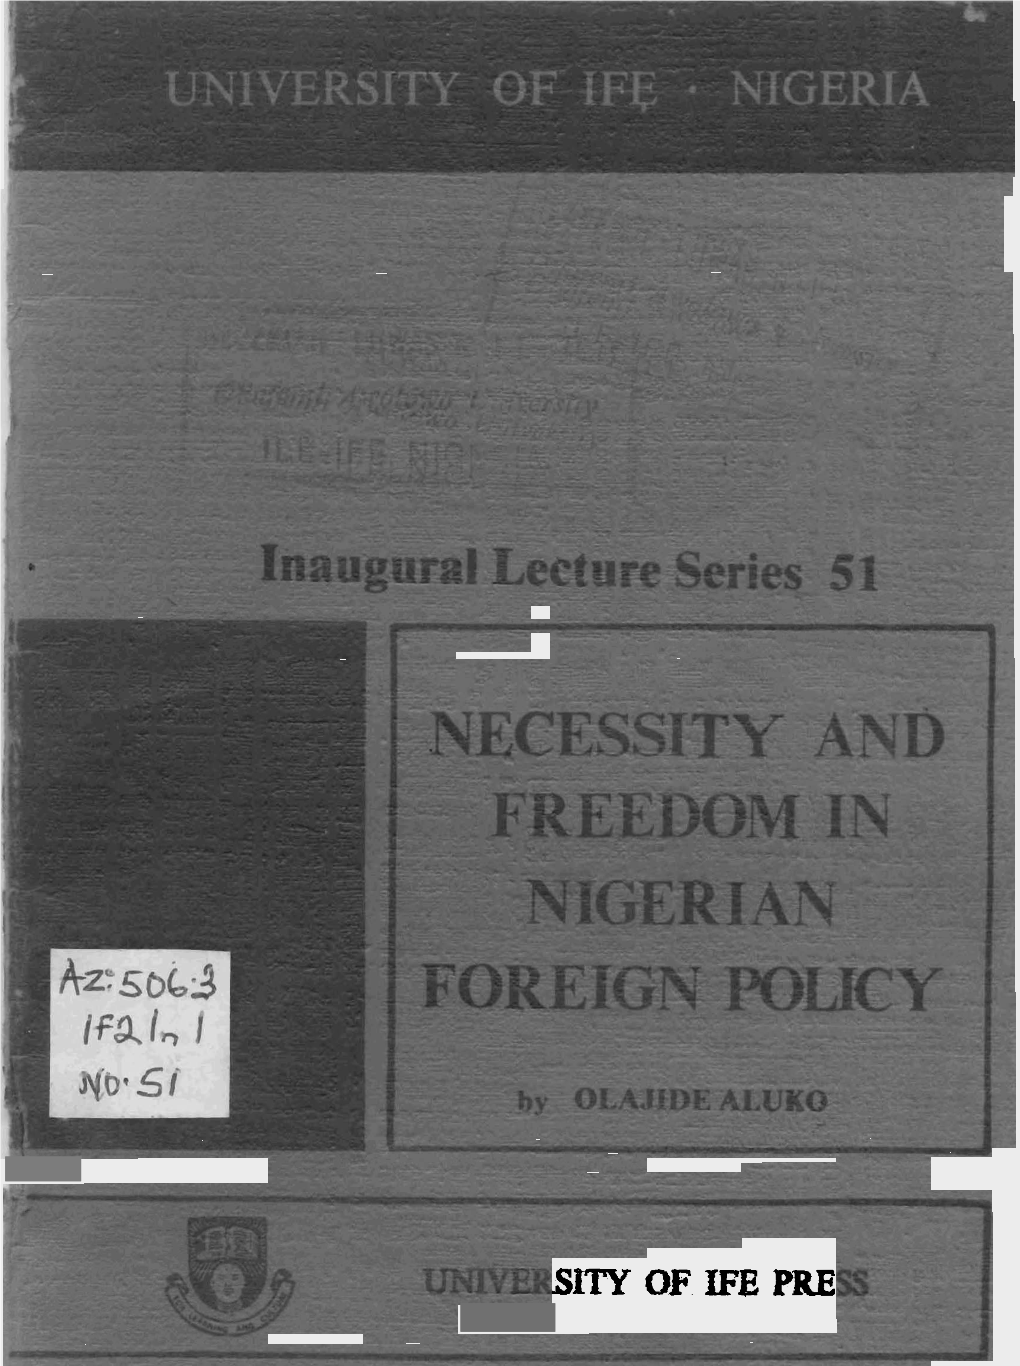 Inaugural Lecture Delivered at the University of Ife on 17Th March, 1981